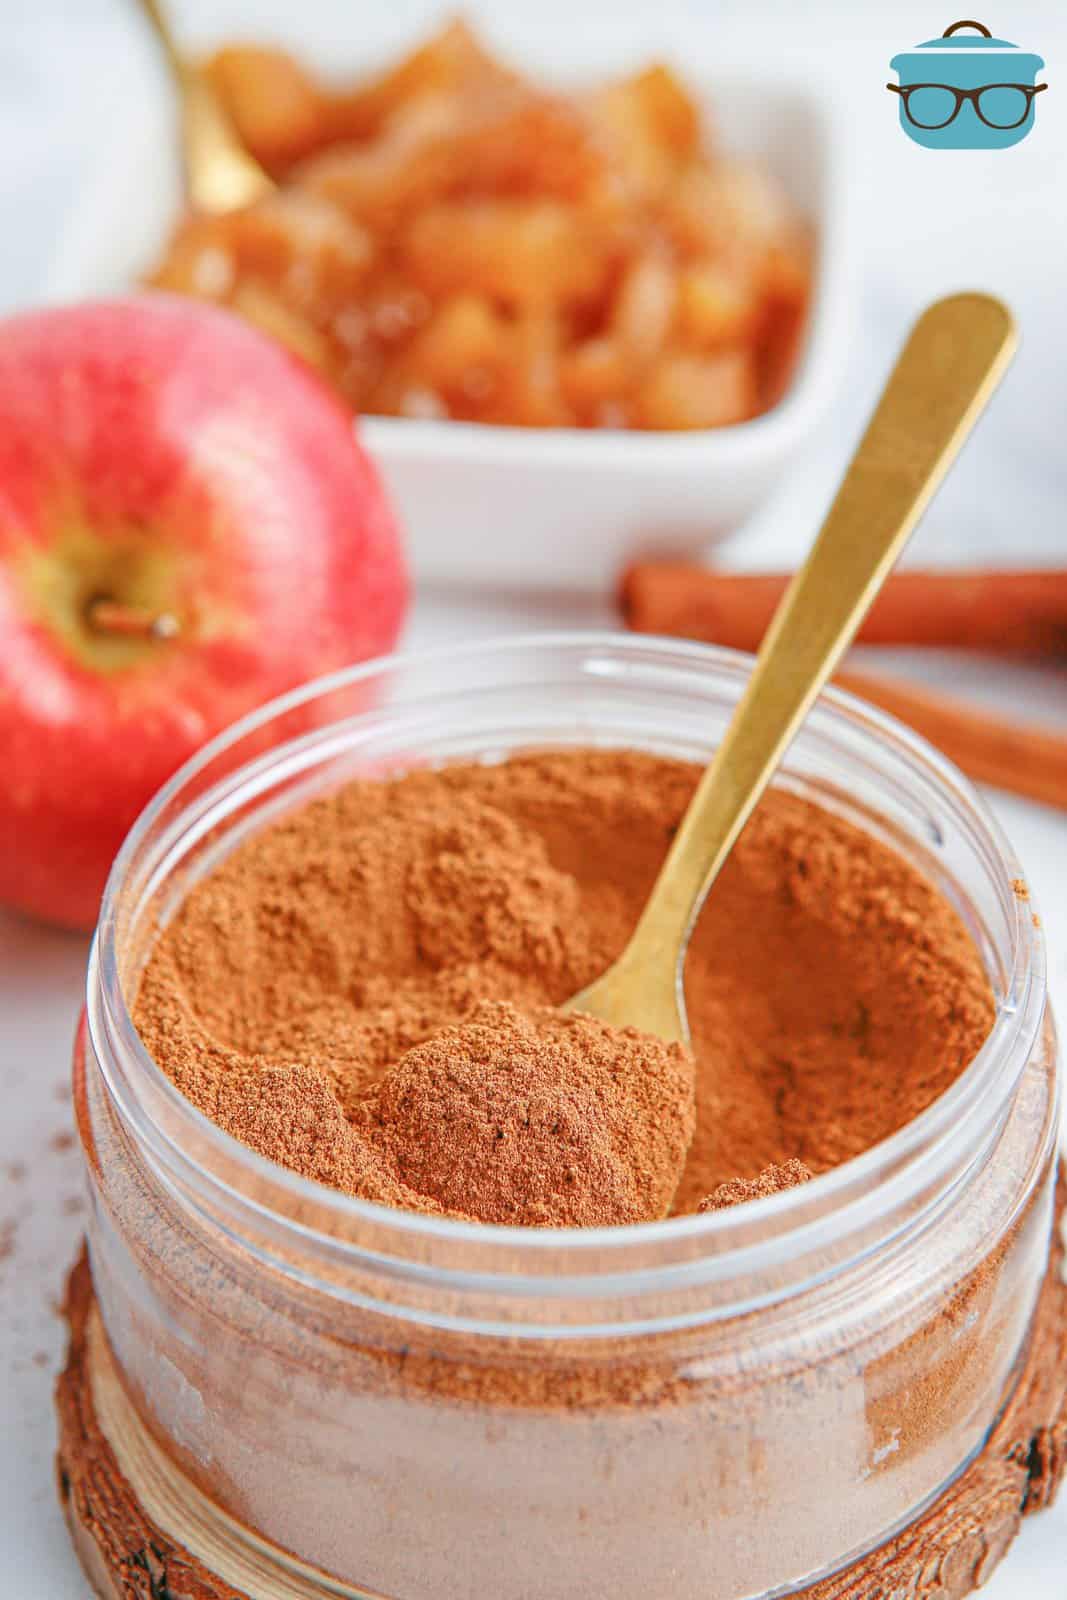 A spoon in a container of homemade Apple Pie Spice.